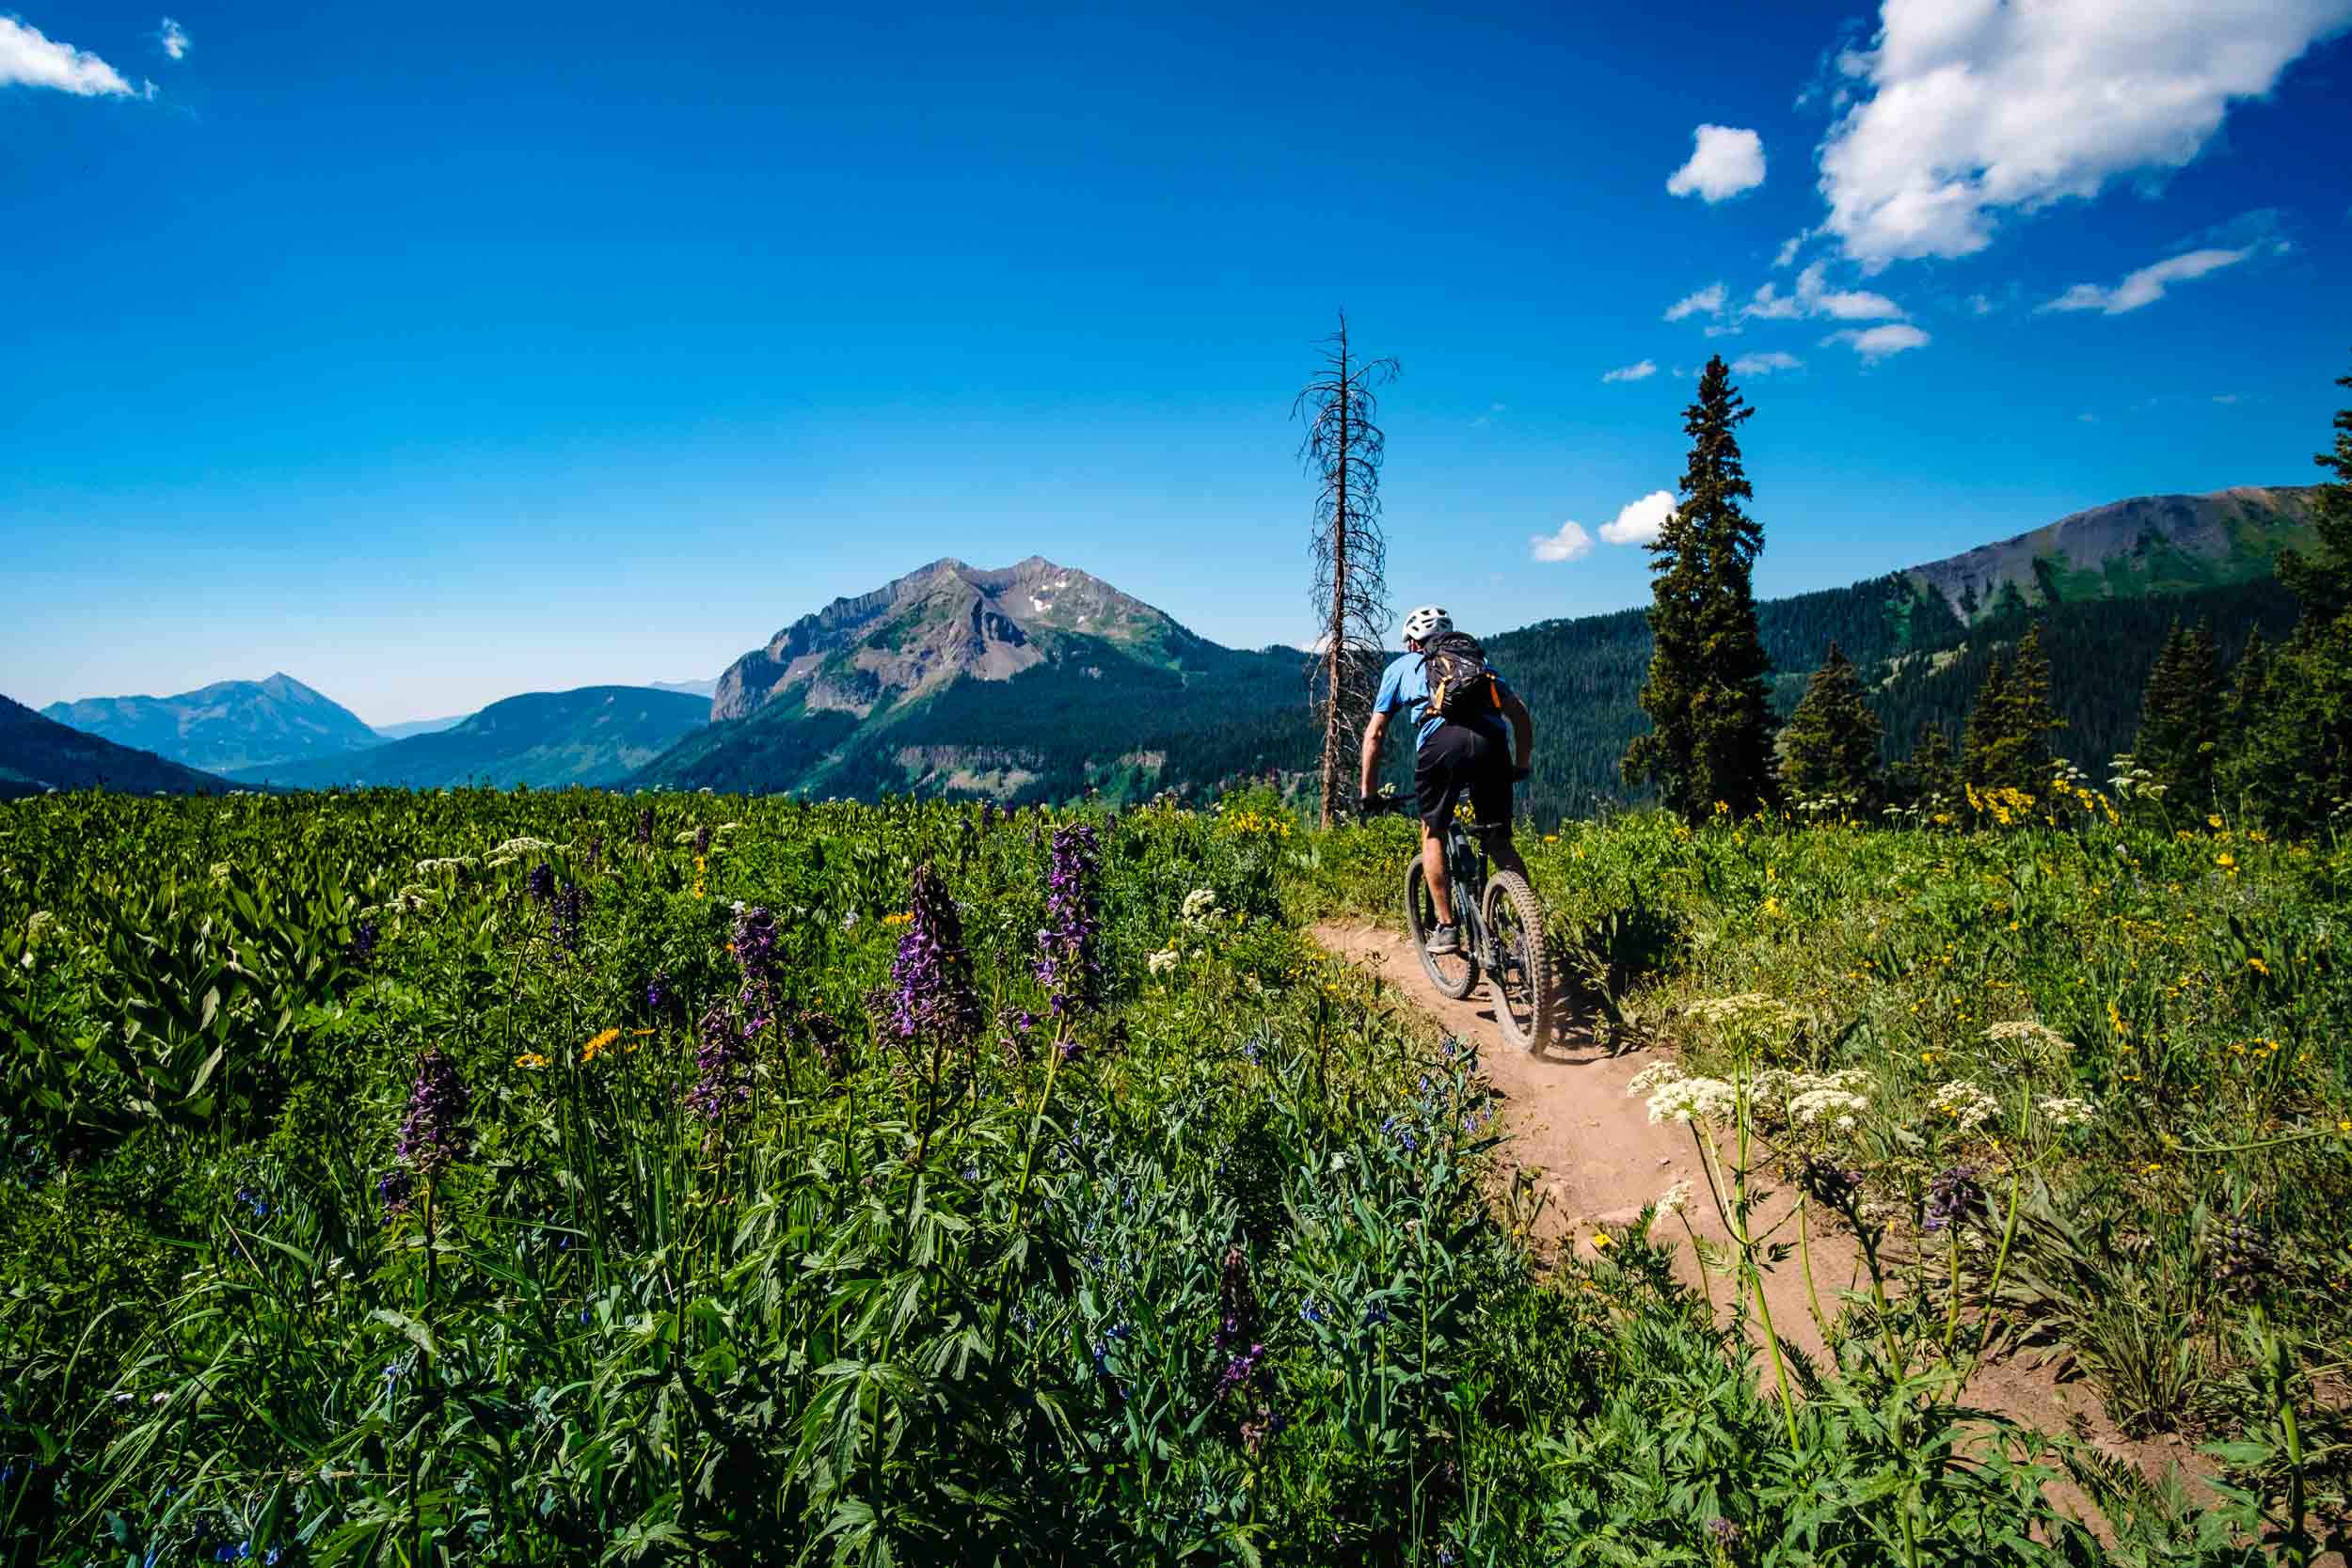  Mountain Biking on the 401 Trail outside of Crested Butte during wildflower season - Fuji XT2, Rokinon 12mm f/2 